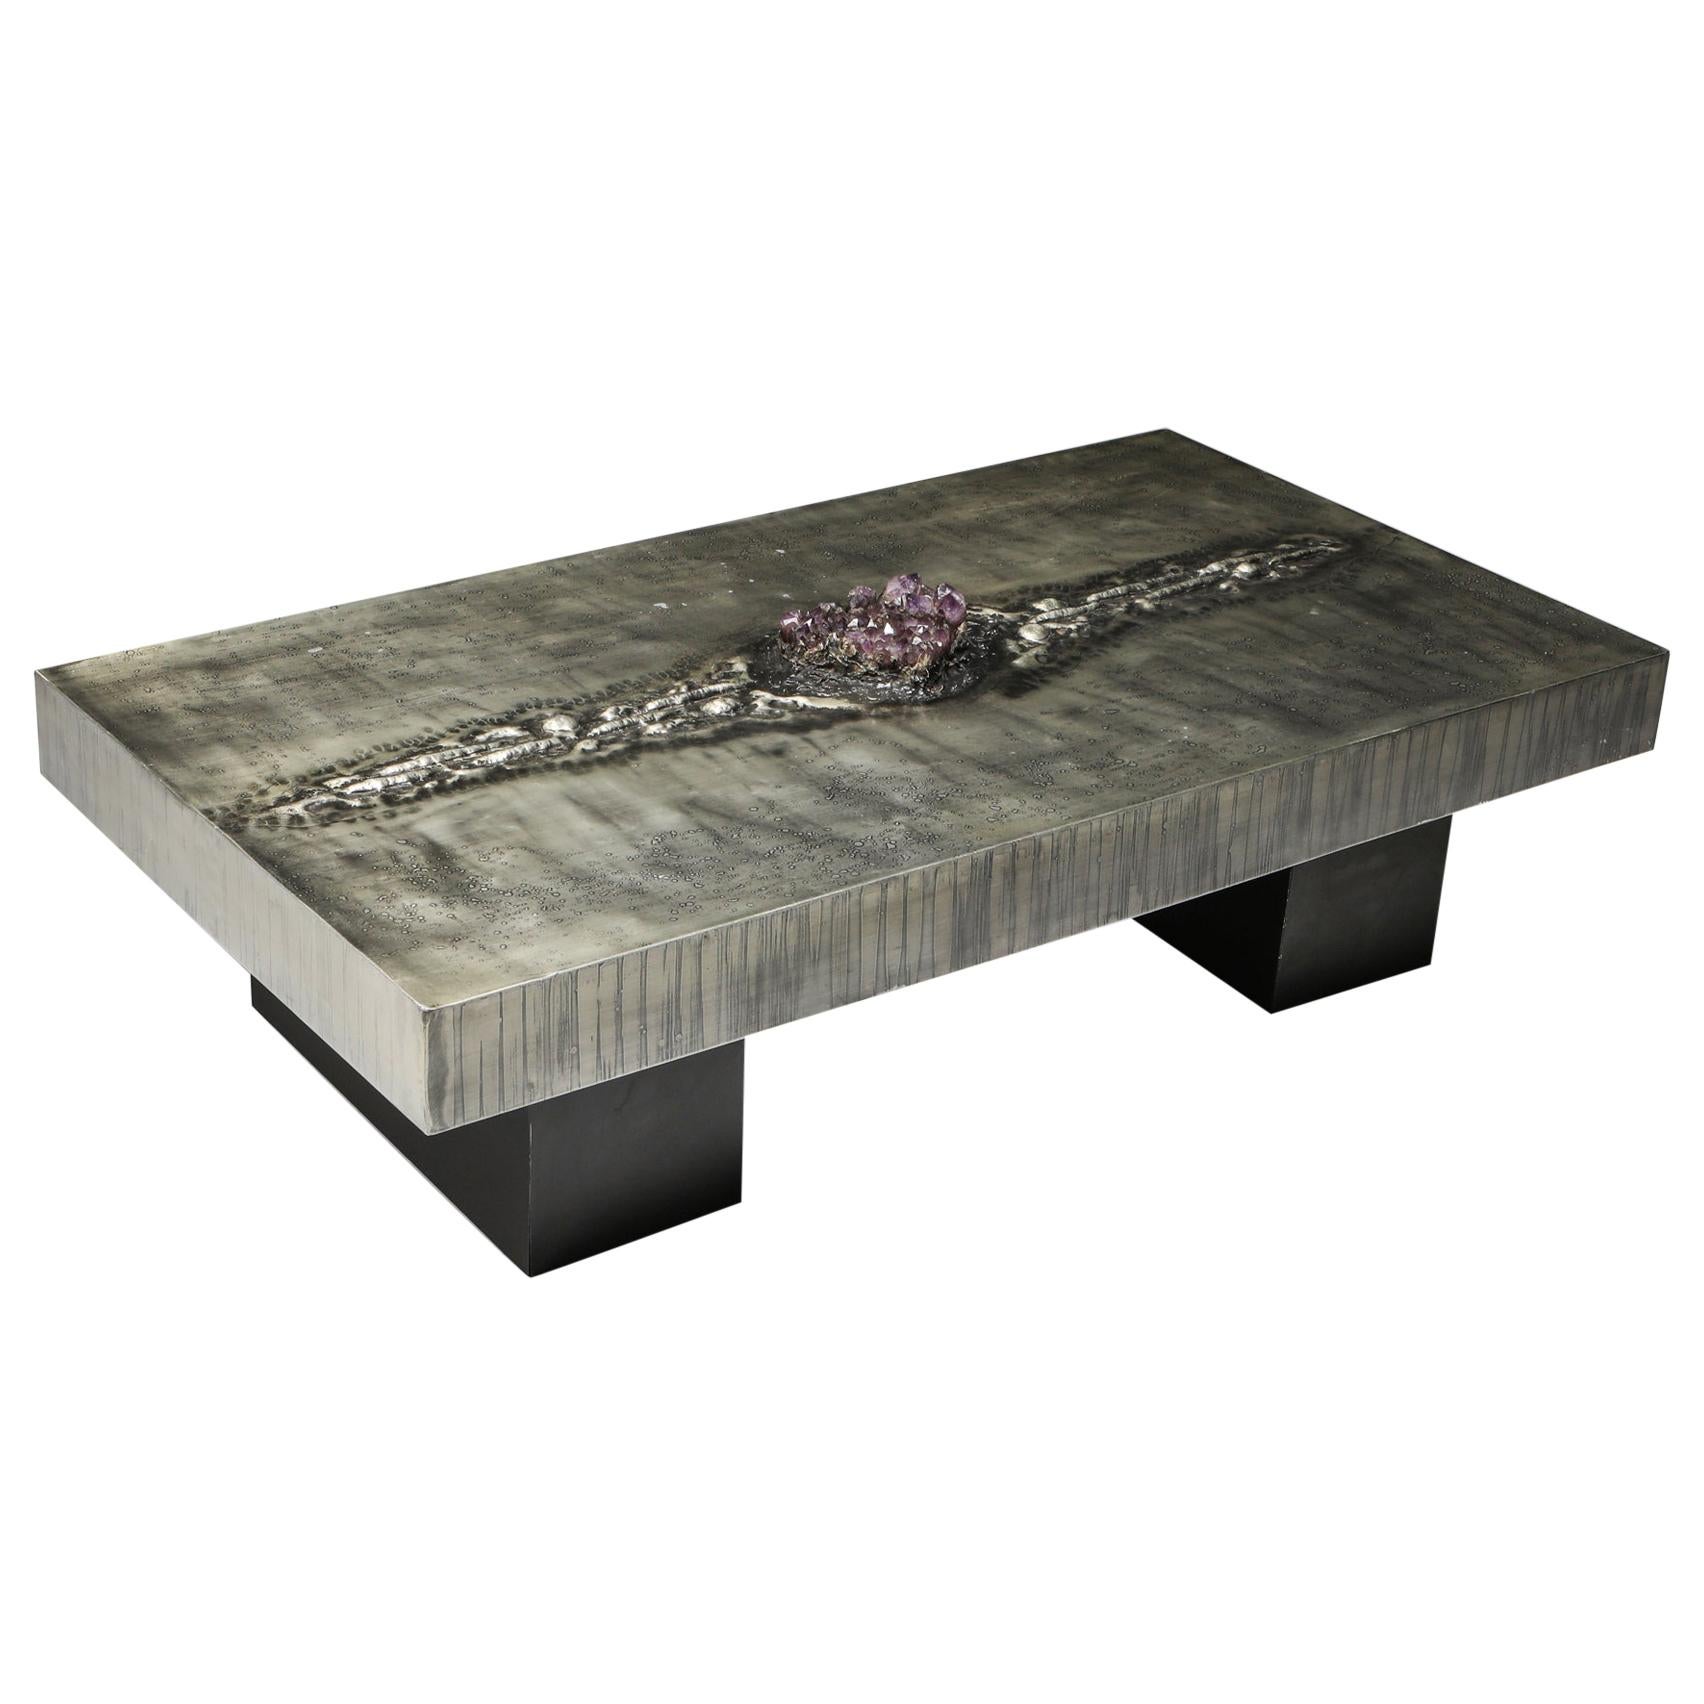 Aluminum Etched Coffee Table with Amethyst Inlay by Marc D'Haenens